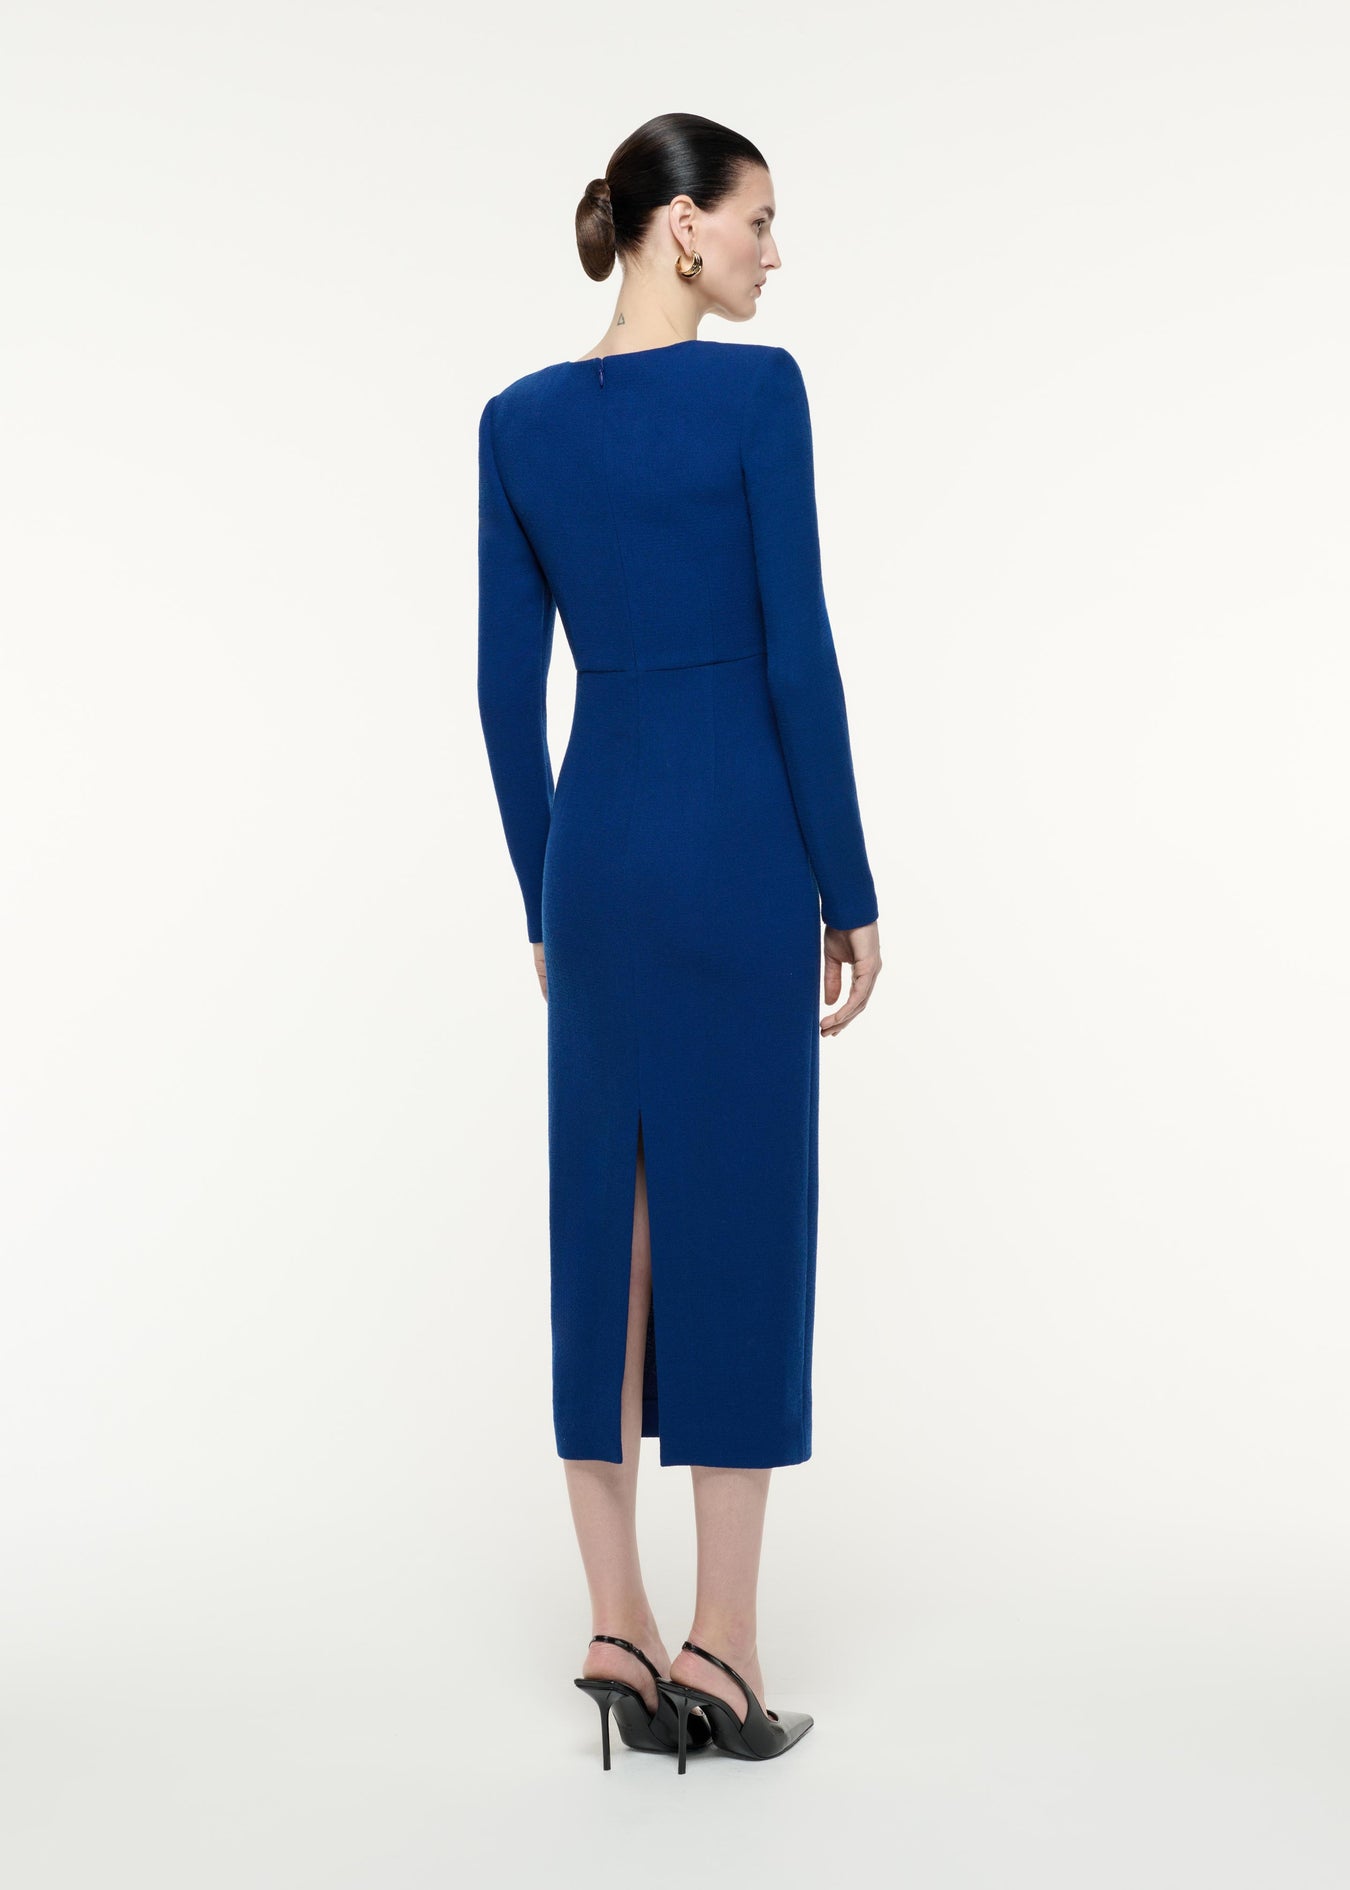 A back view image of a model wearing the Long Sleeve Wool Crepe Midi Dress in Navy